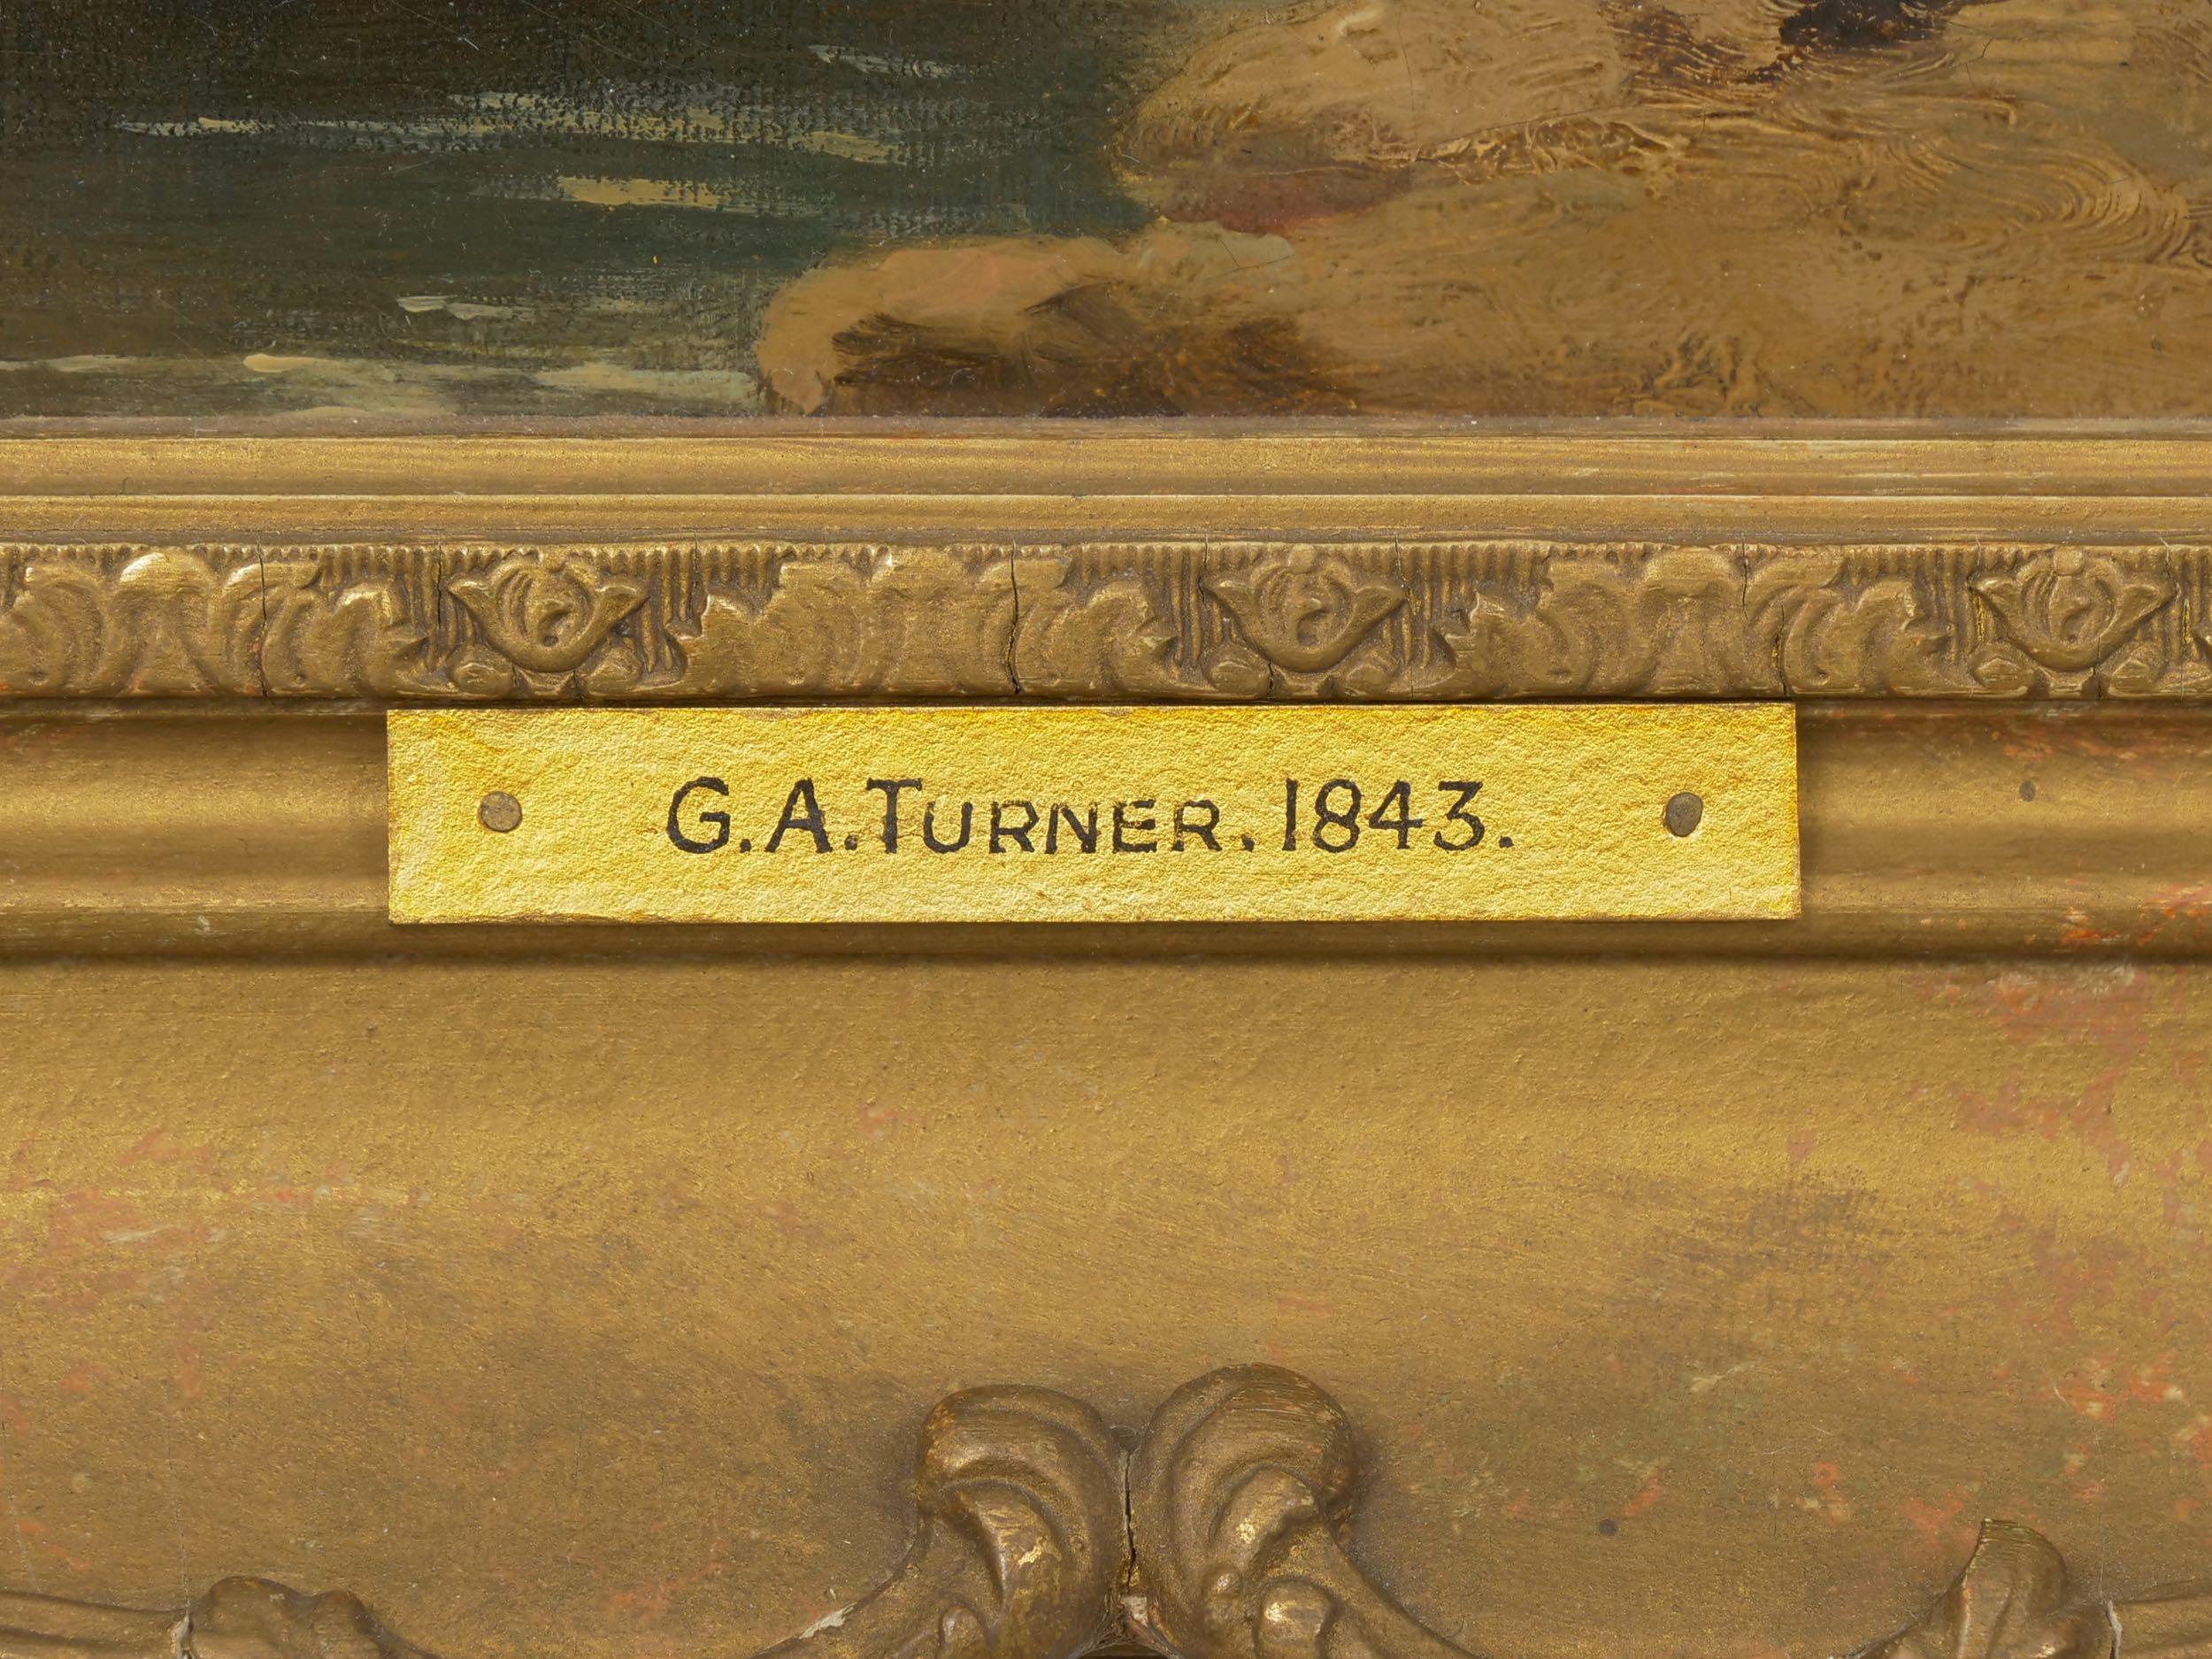 Pair of Antique English Landscape Paintings circa 1843 by G.A. Turner 10